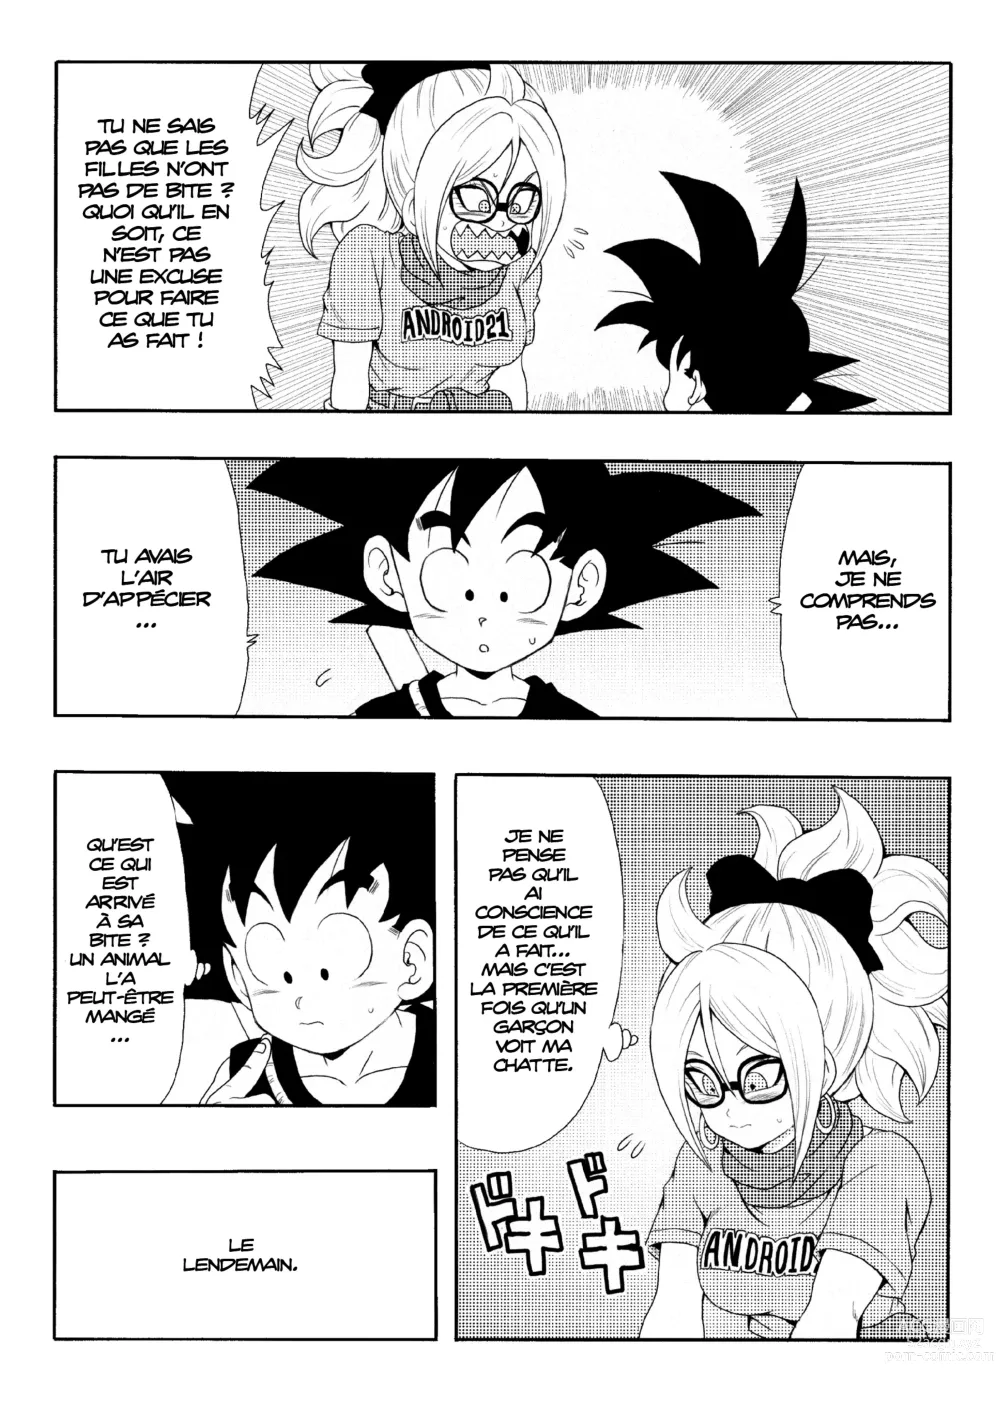 Page 8 of doujinshi Episode of Bulma - Android 21 Version